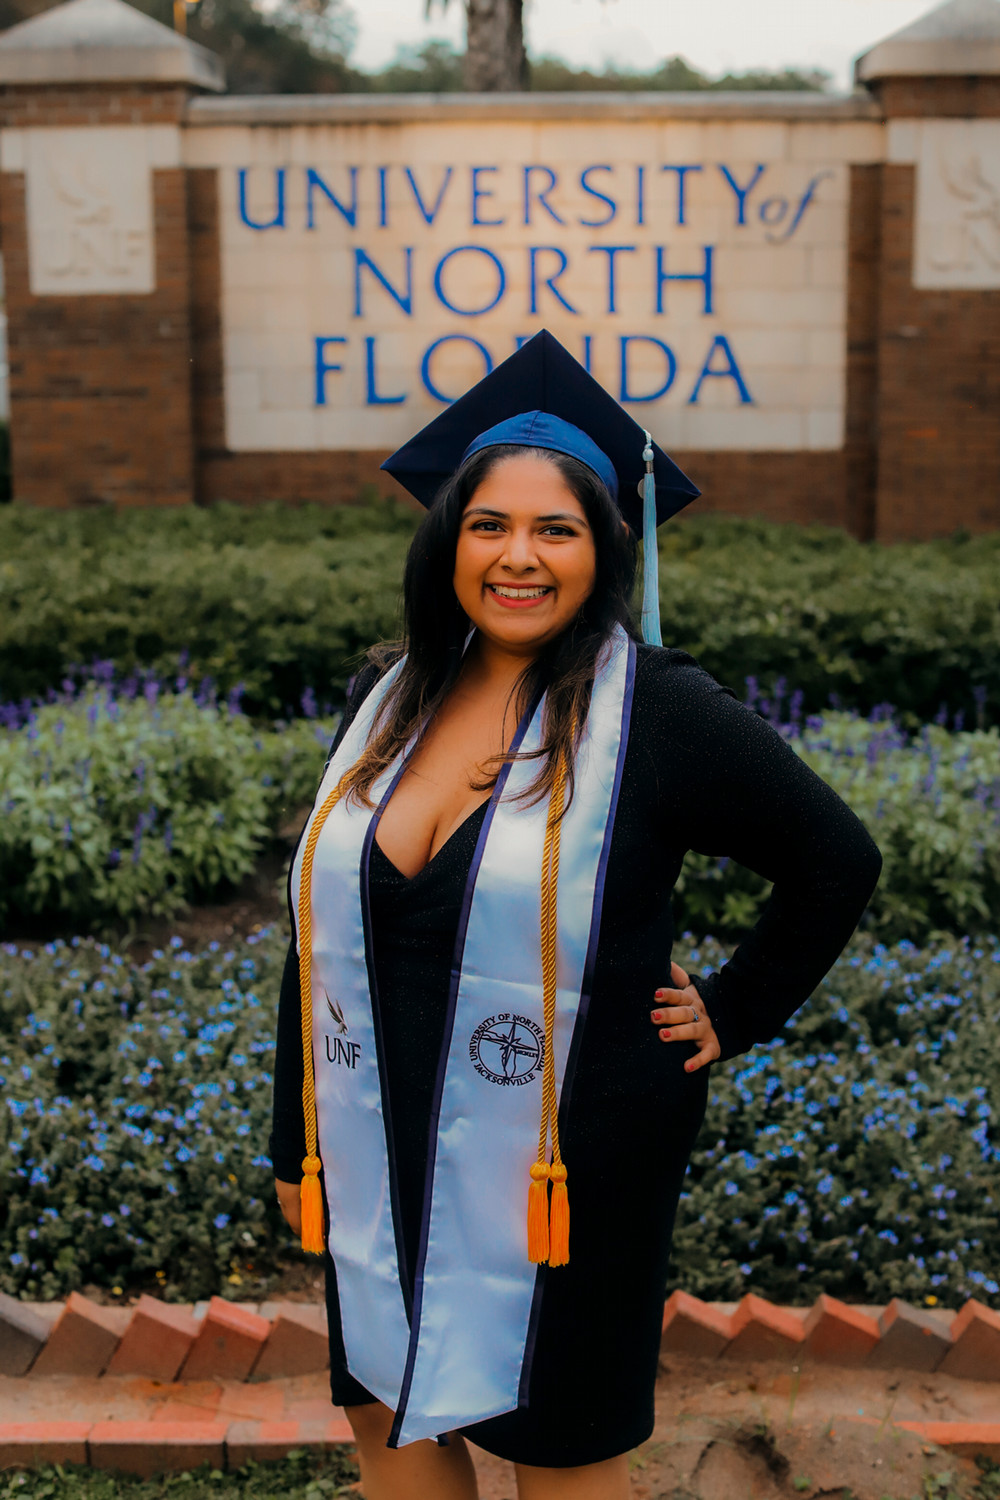 Girl in black dress and wearing a dark blue graduation cap stands in front of a UNF sign.